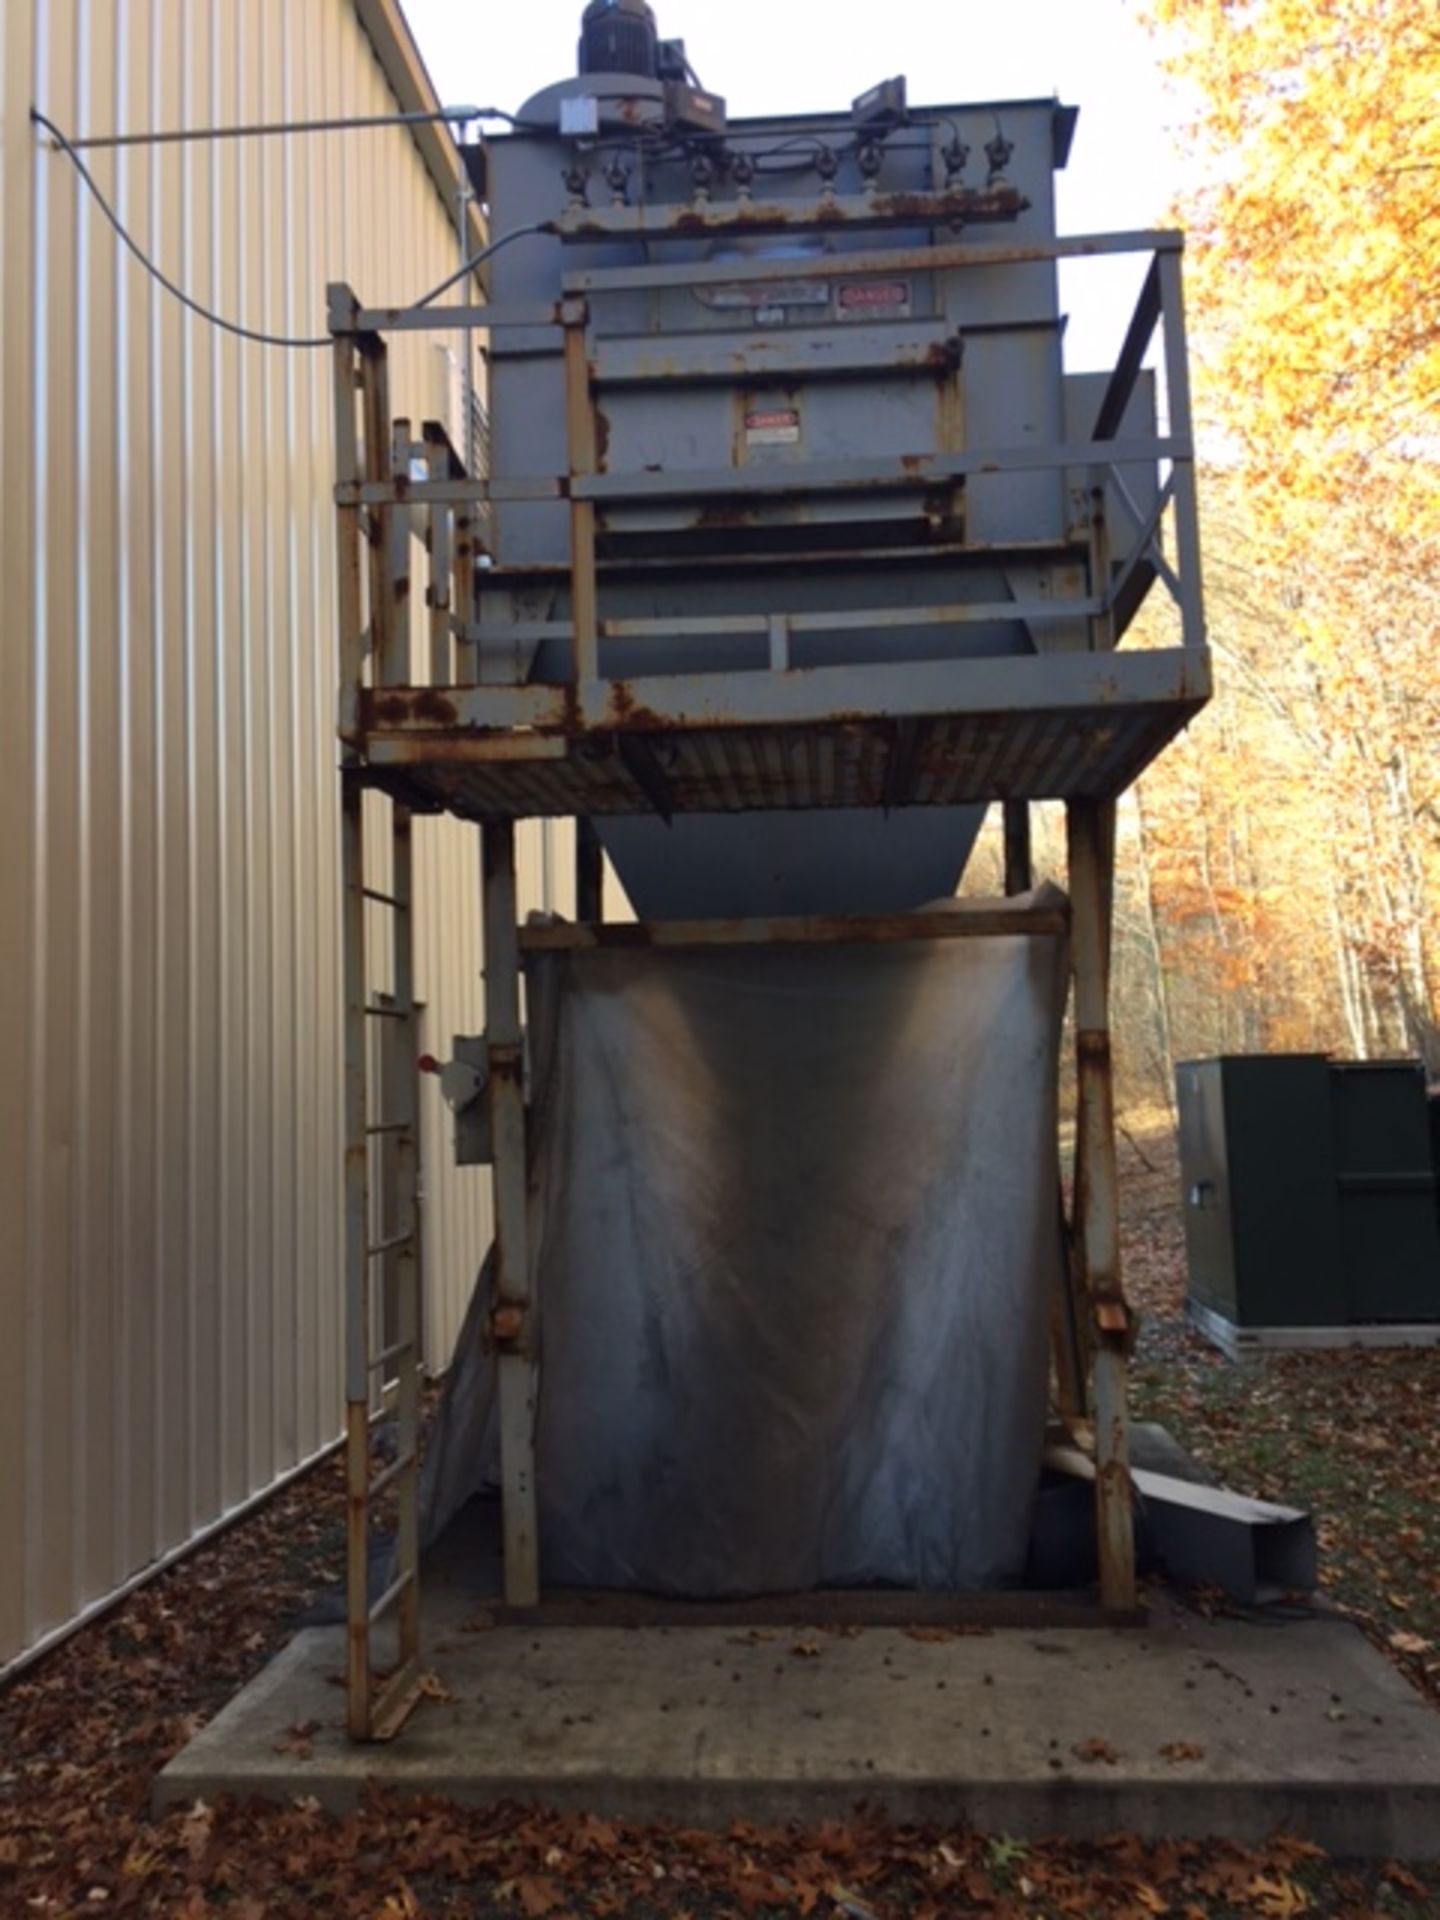 LOT: Dust Collector with Ducting. LATE REMOVAL - 12/9/2016